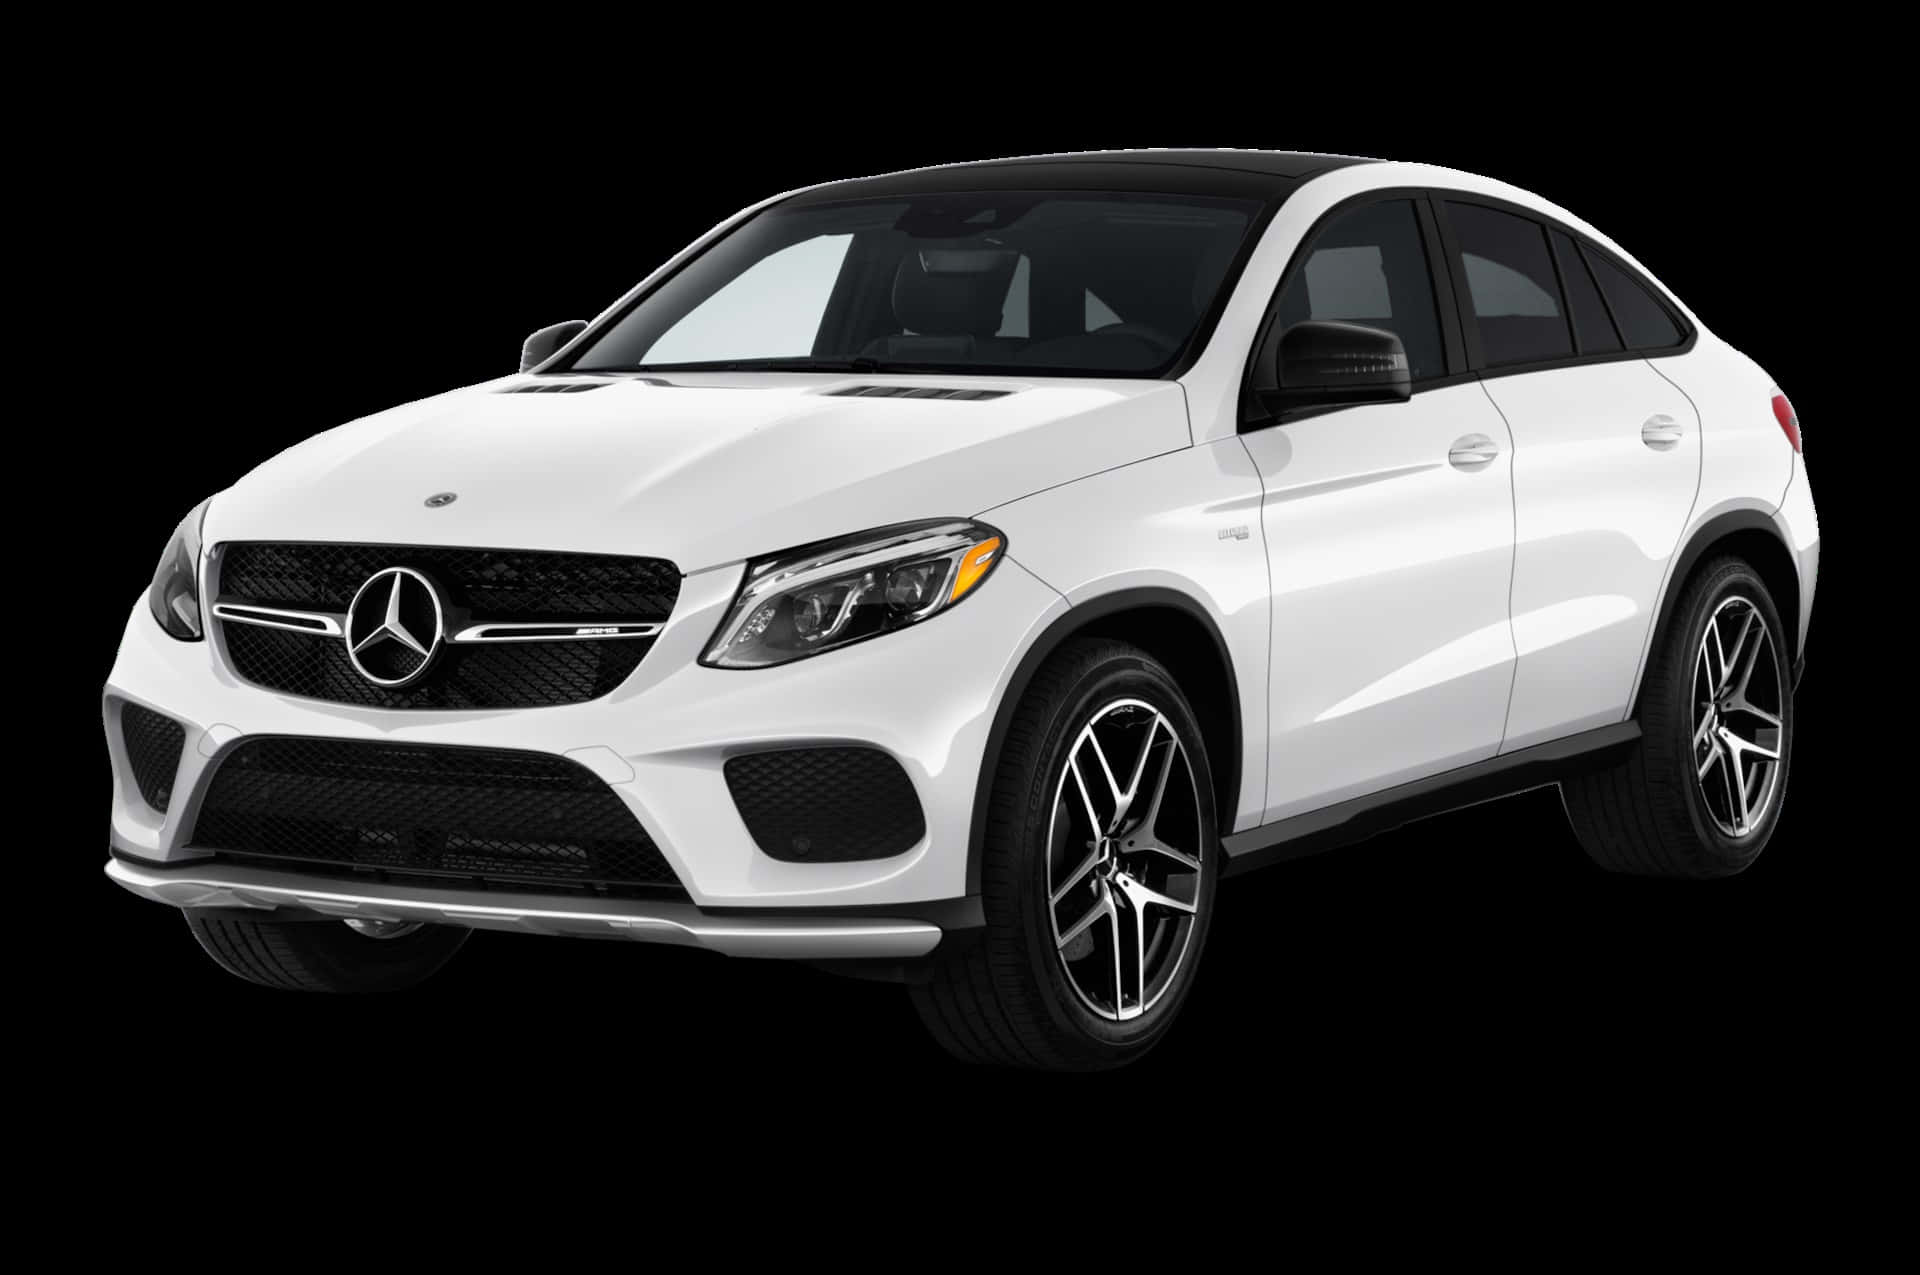 Luxurious Mercedes-Benz GLE-Class In Action Wallpaper